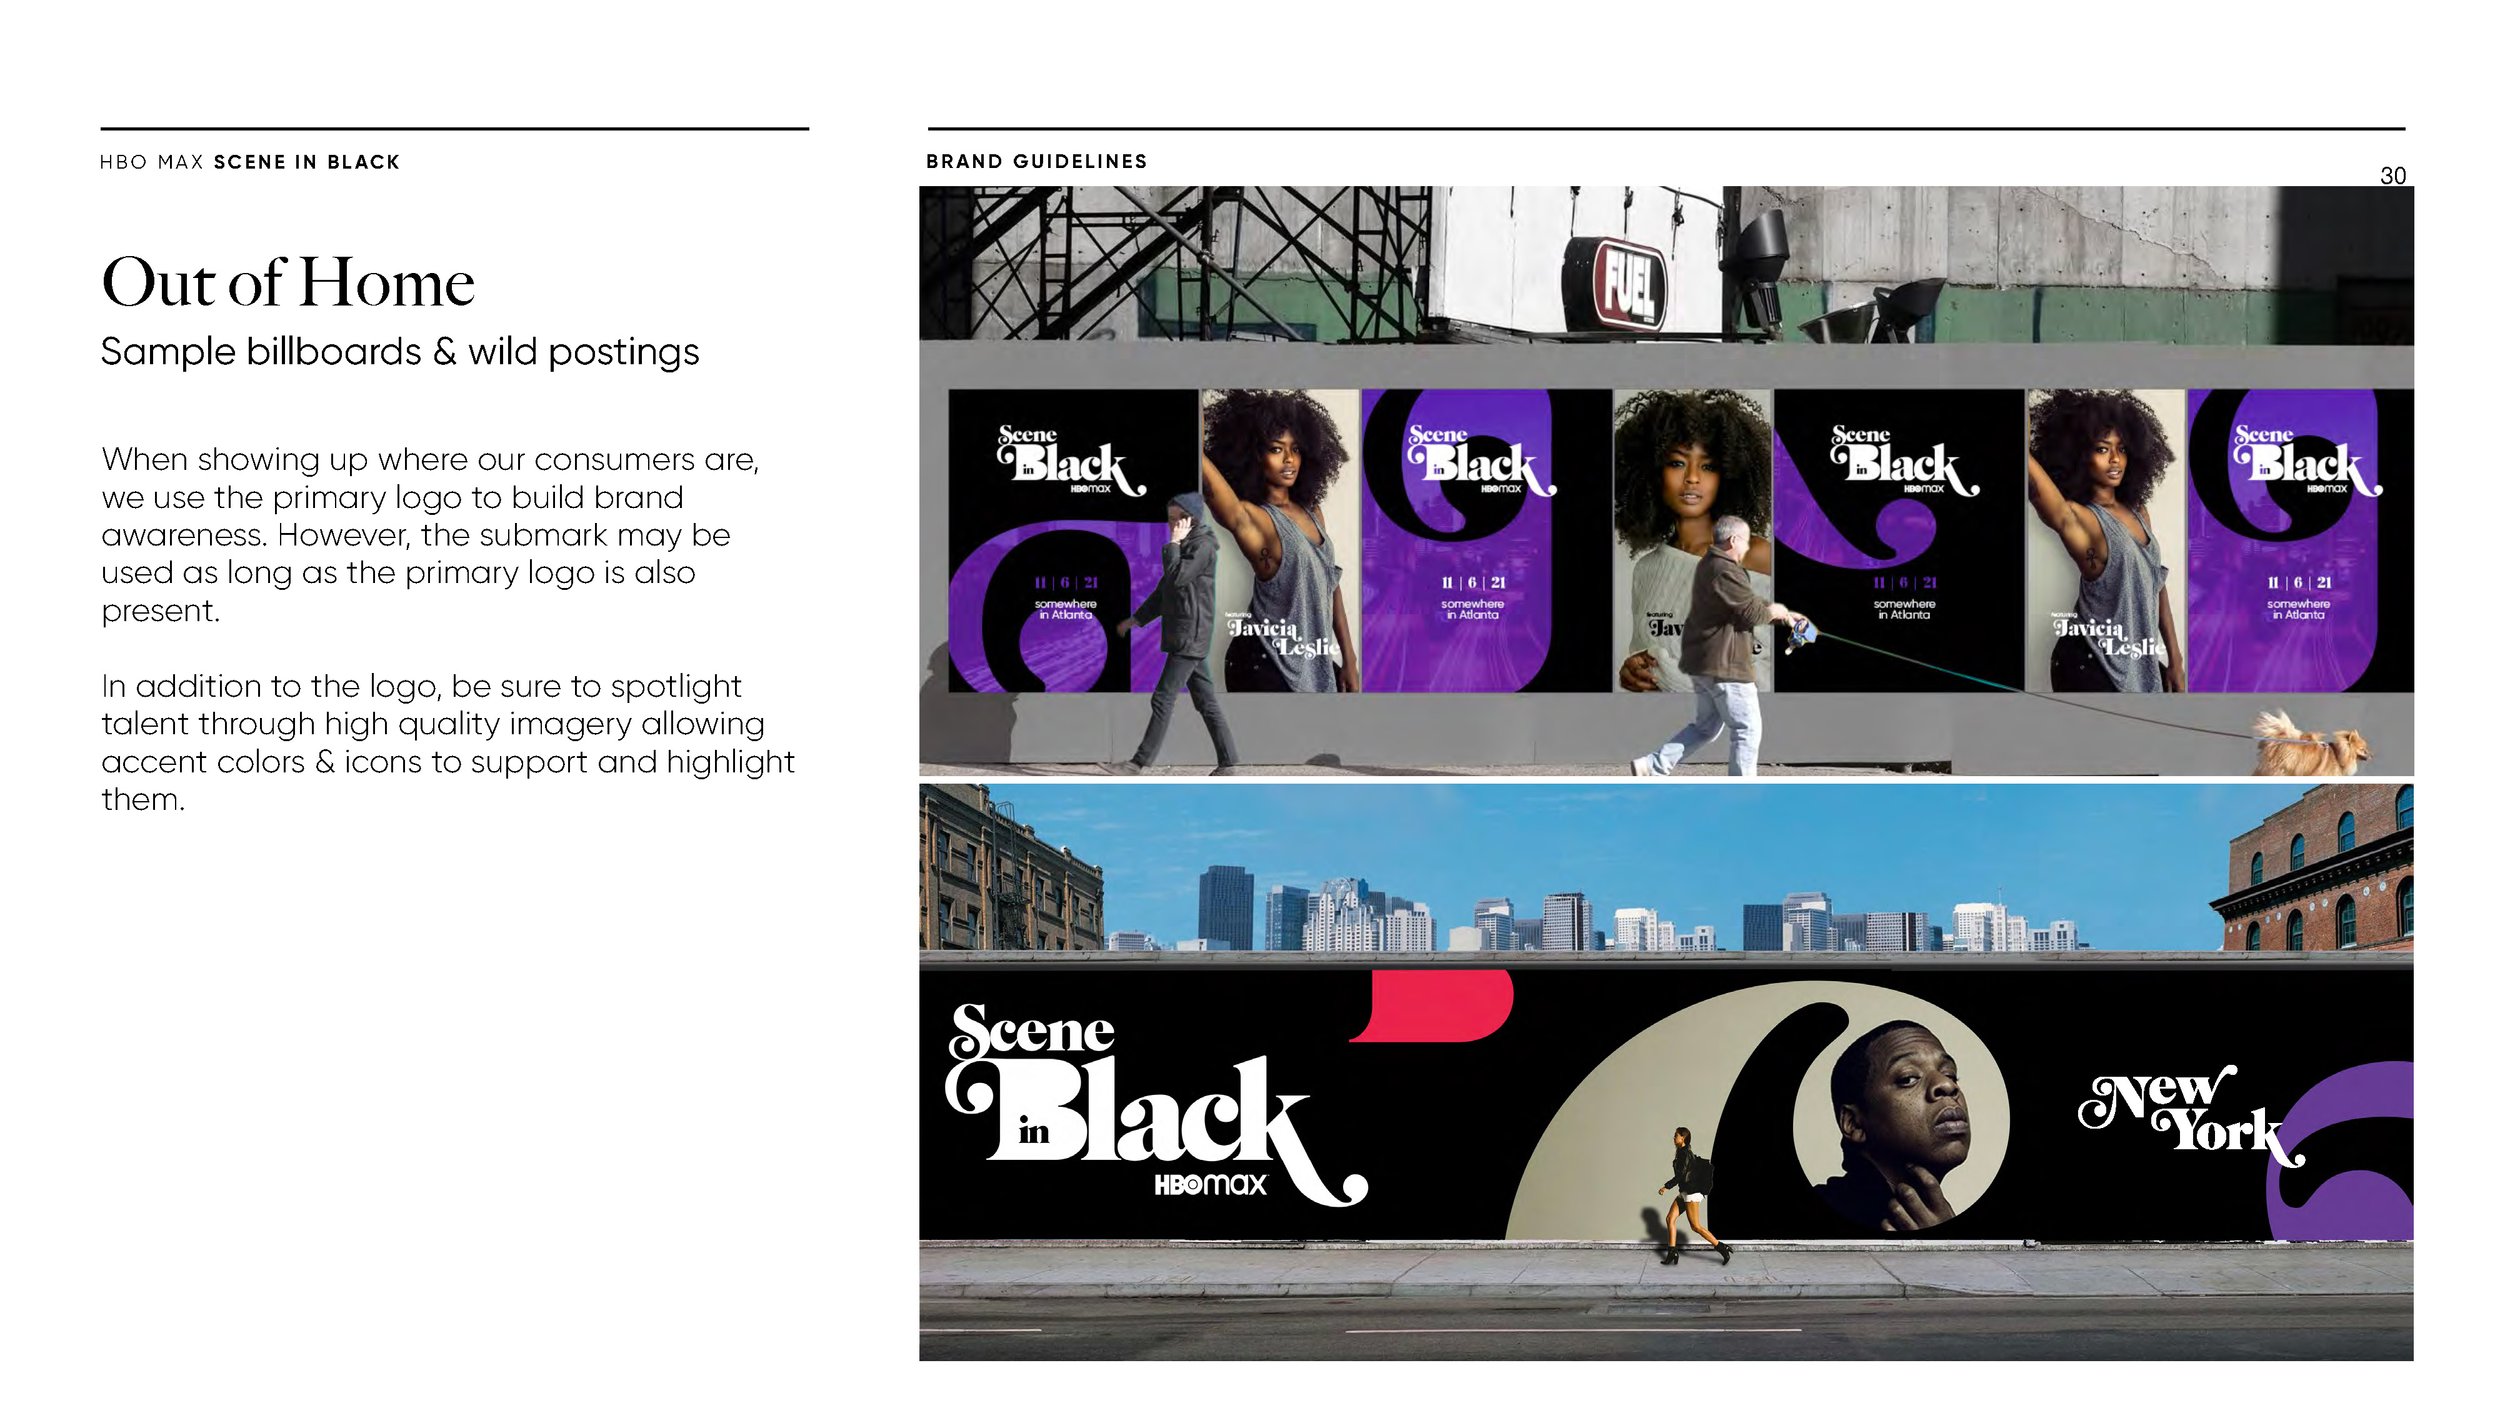 HBOMax_SceneinBlack | Brand Guidelines | Final Oct21_Page_30.jpg